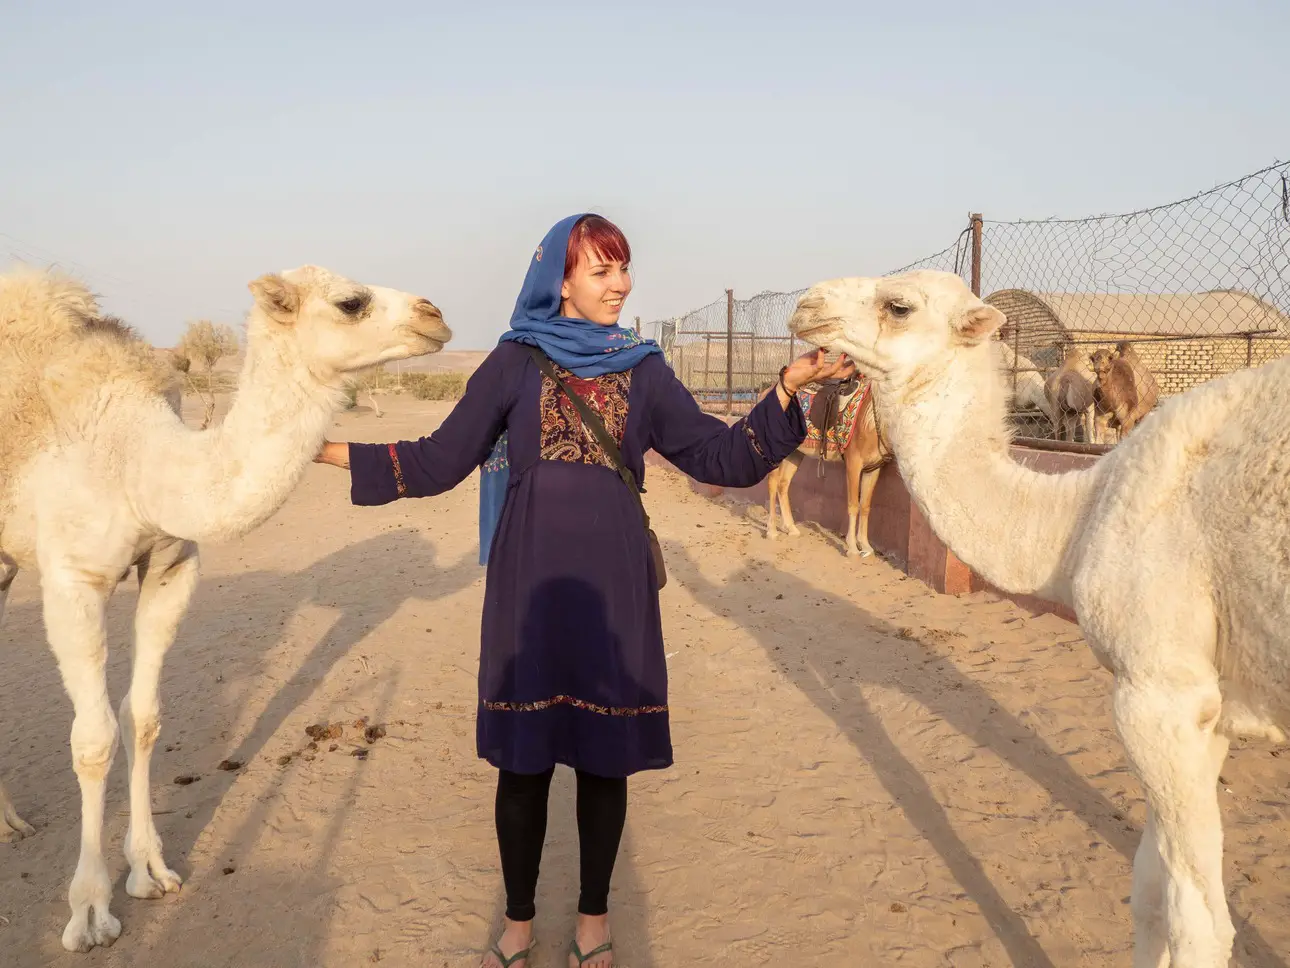 Girl in a dress and headscarf petting two white camels